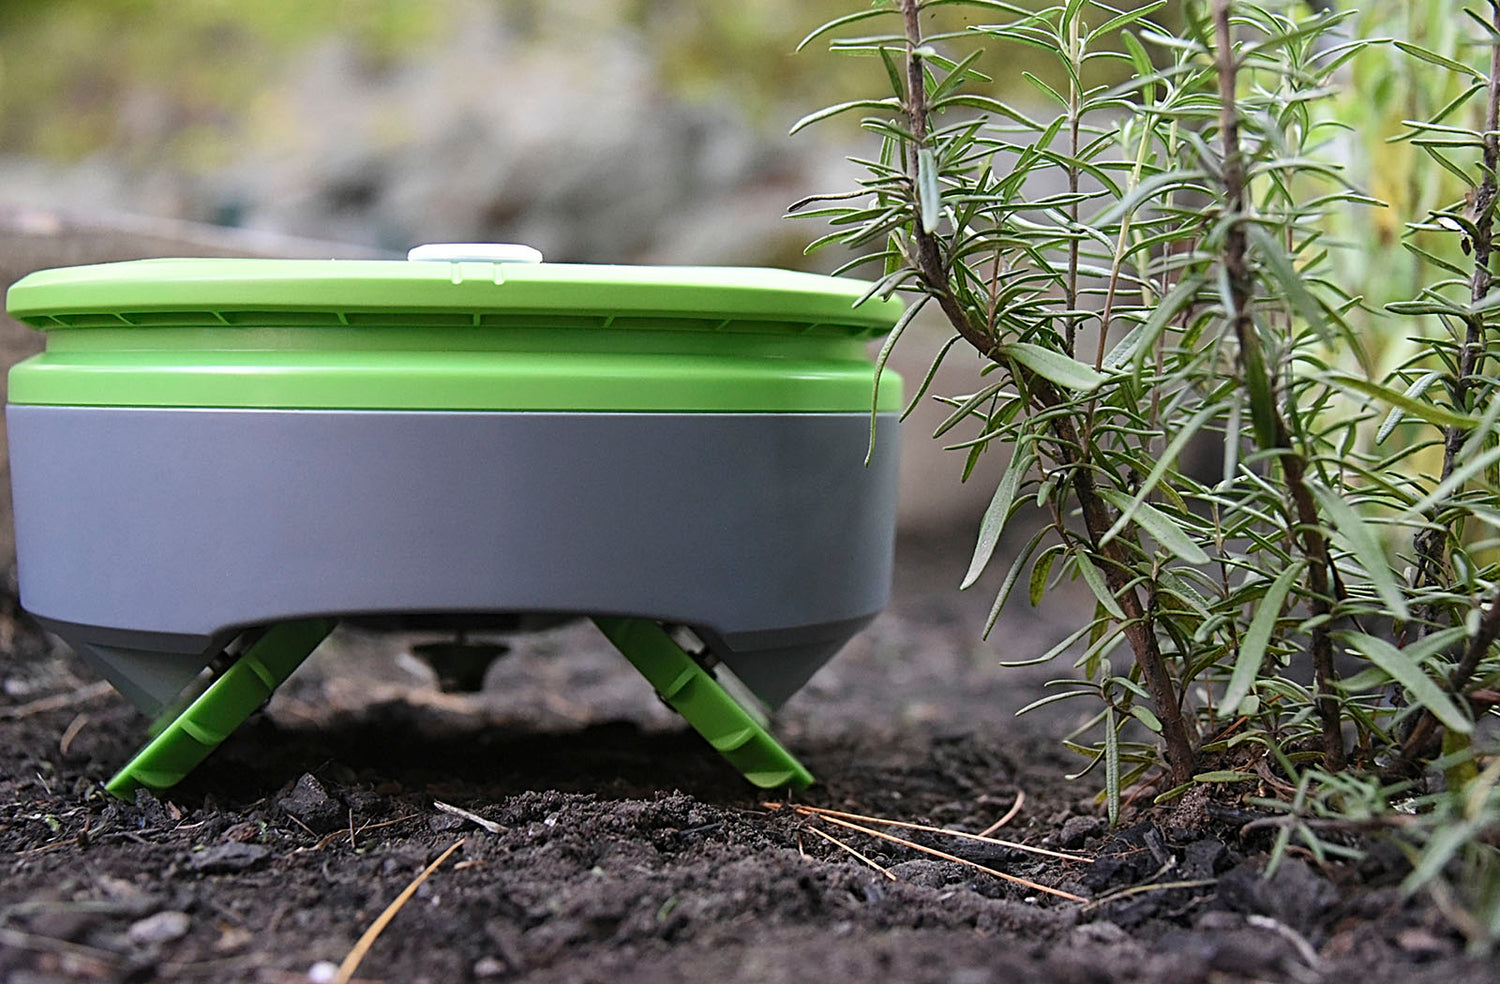 Tertill Weeding Robot's onboard weed-whacker cuts down weeds in your garden. Tertill is a better way to weed, just press the button and let the robot take care of the rest. Kills weeds all season long. Chemical free, solar powered, really works!